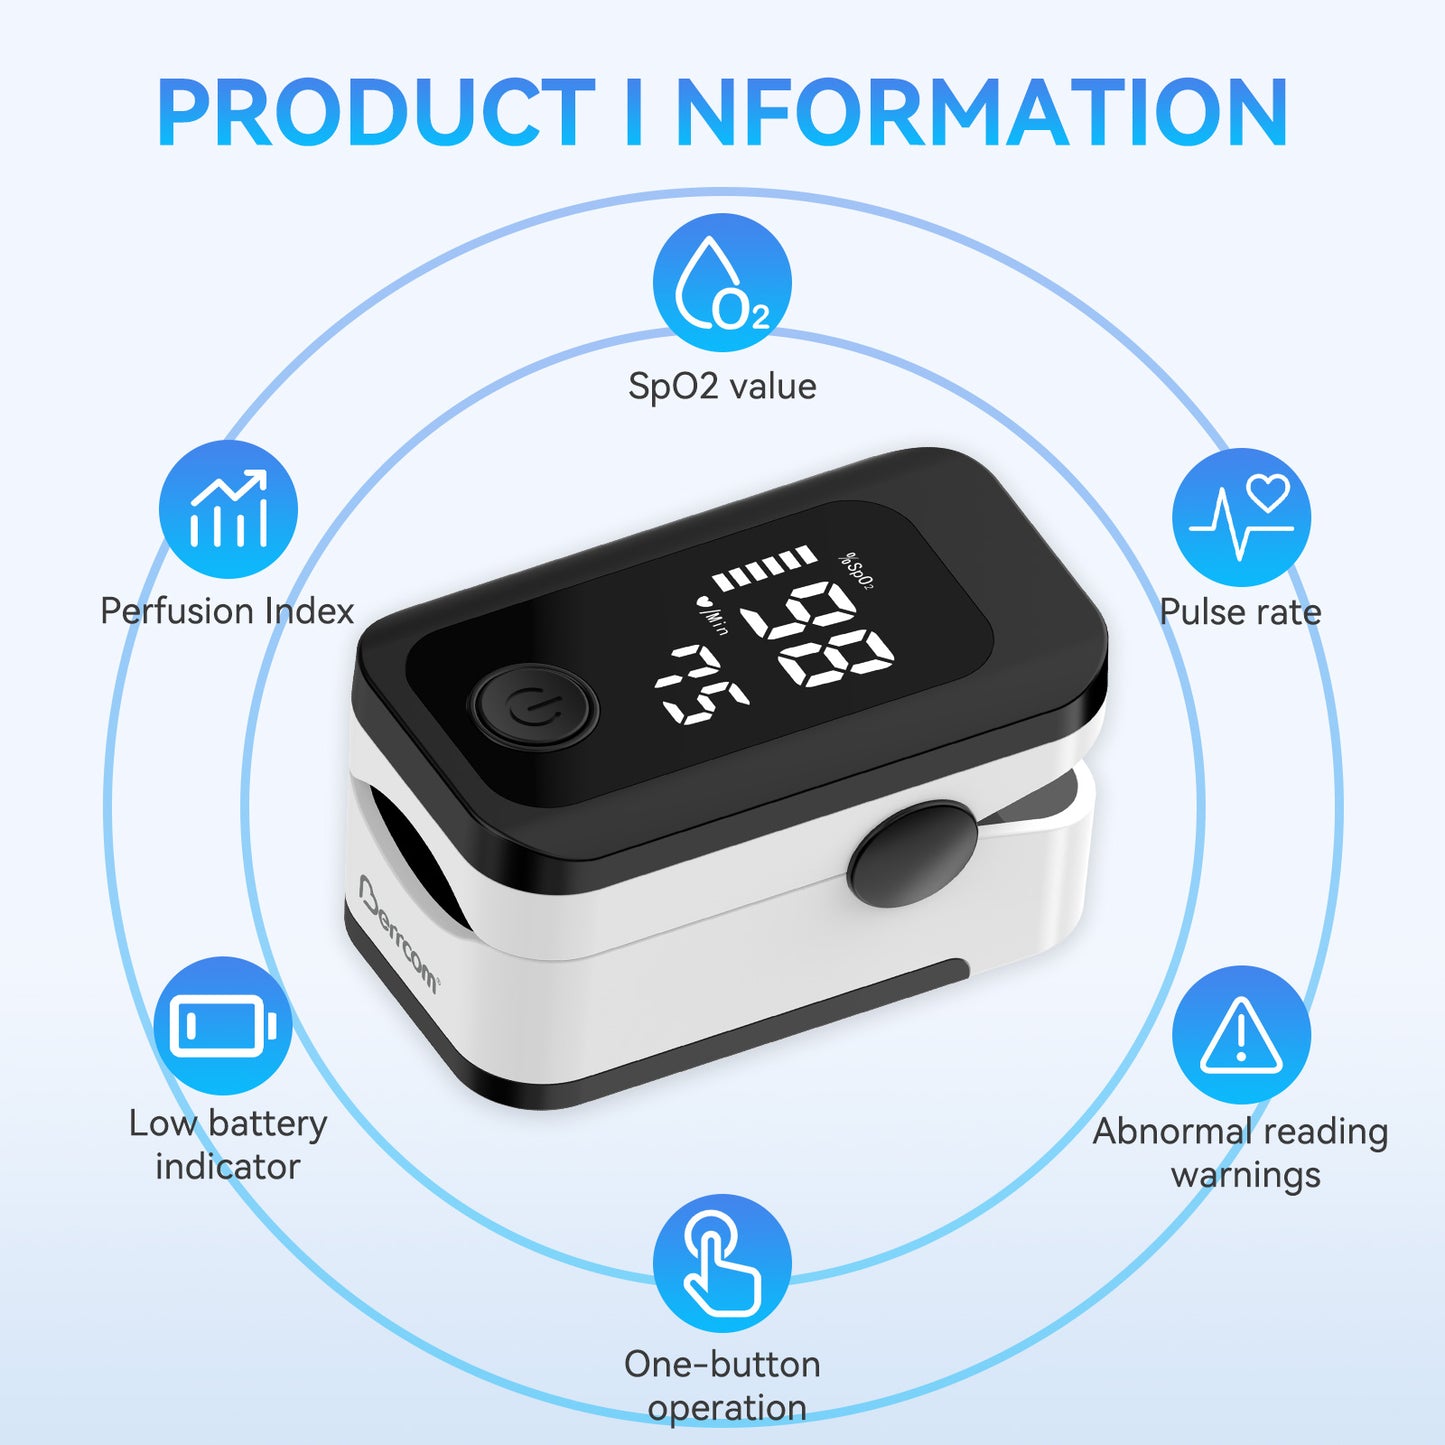 Berrcom Pulse Oximeter Blood Oxygen Saturation Monitor Finger High Accuracy Sats Monitor for Child, Adult with LED Display, Batteries and Lanyard